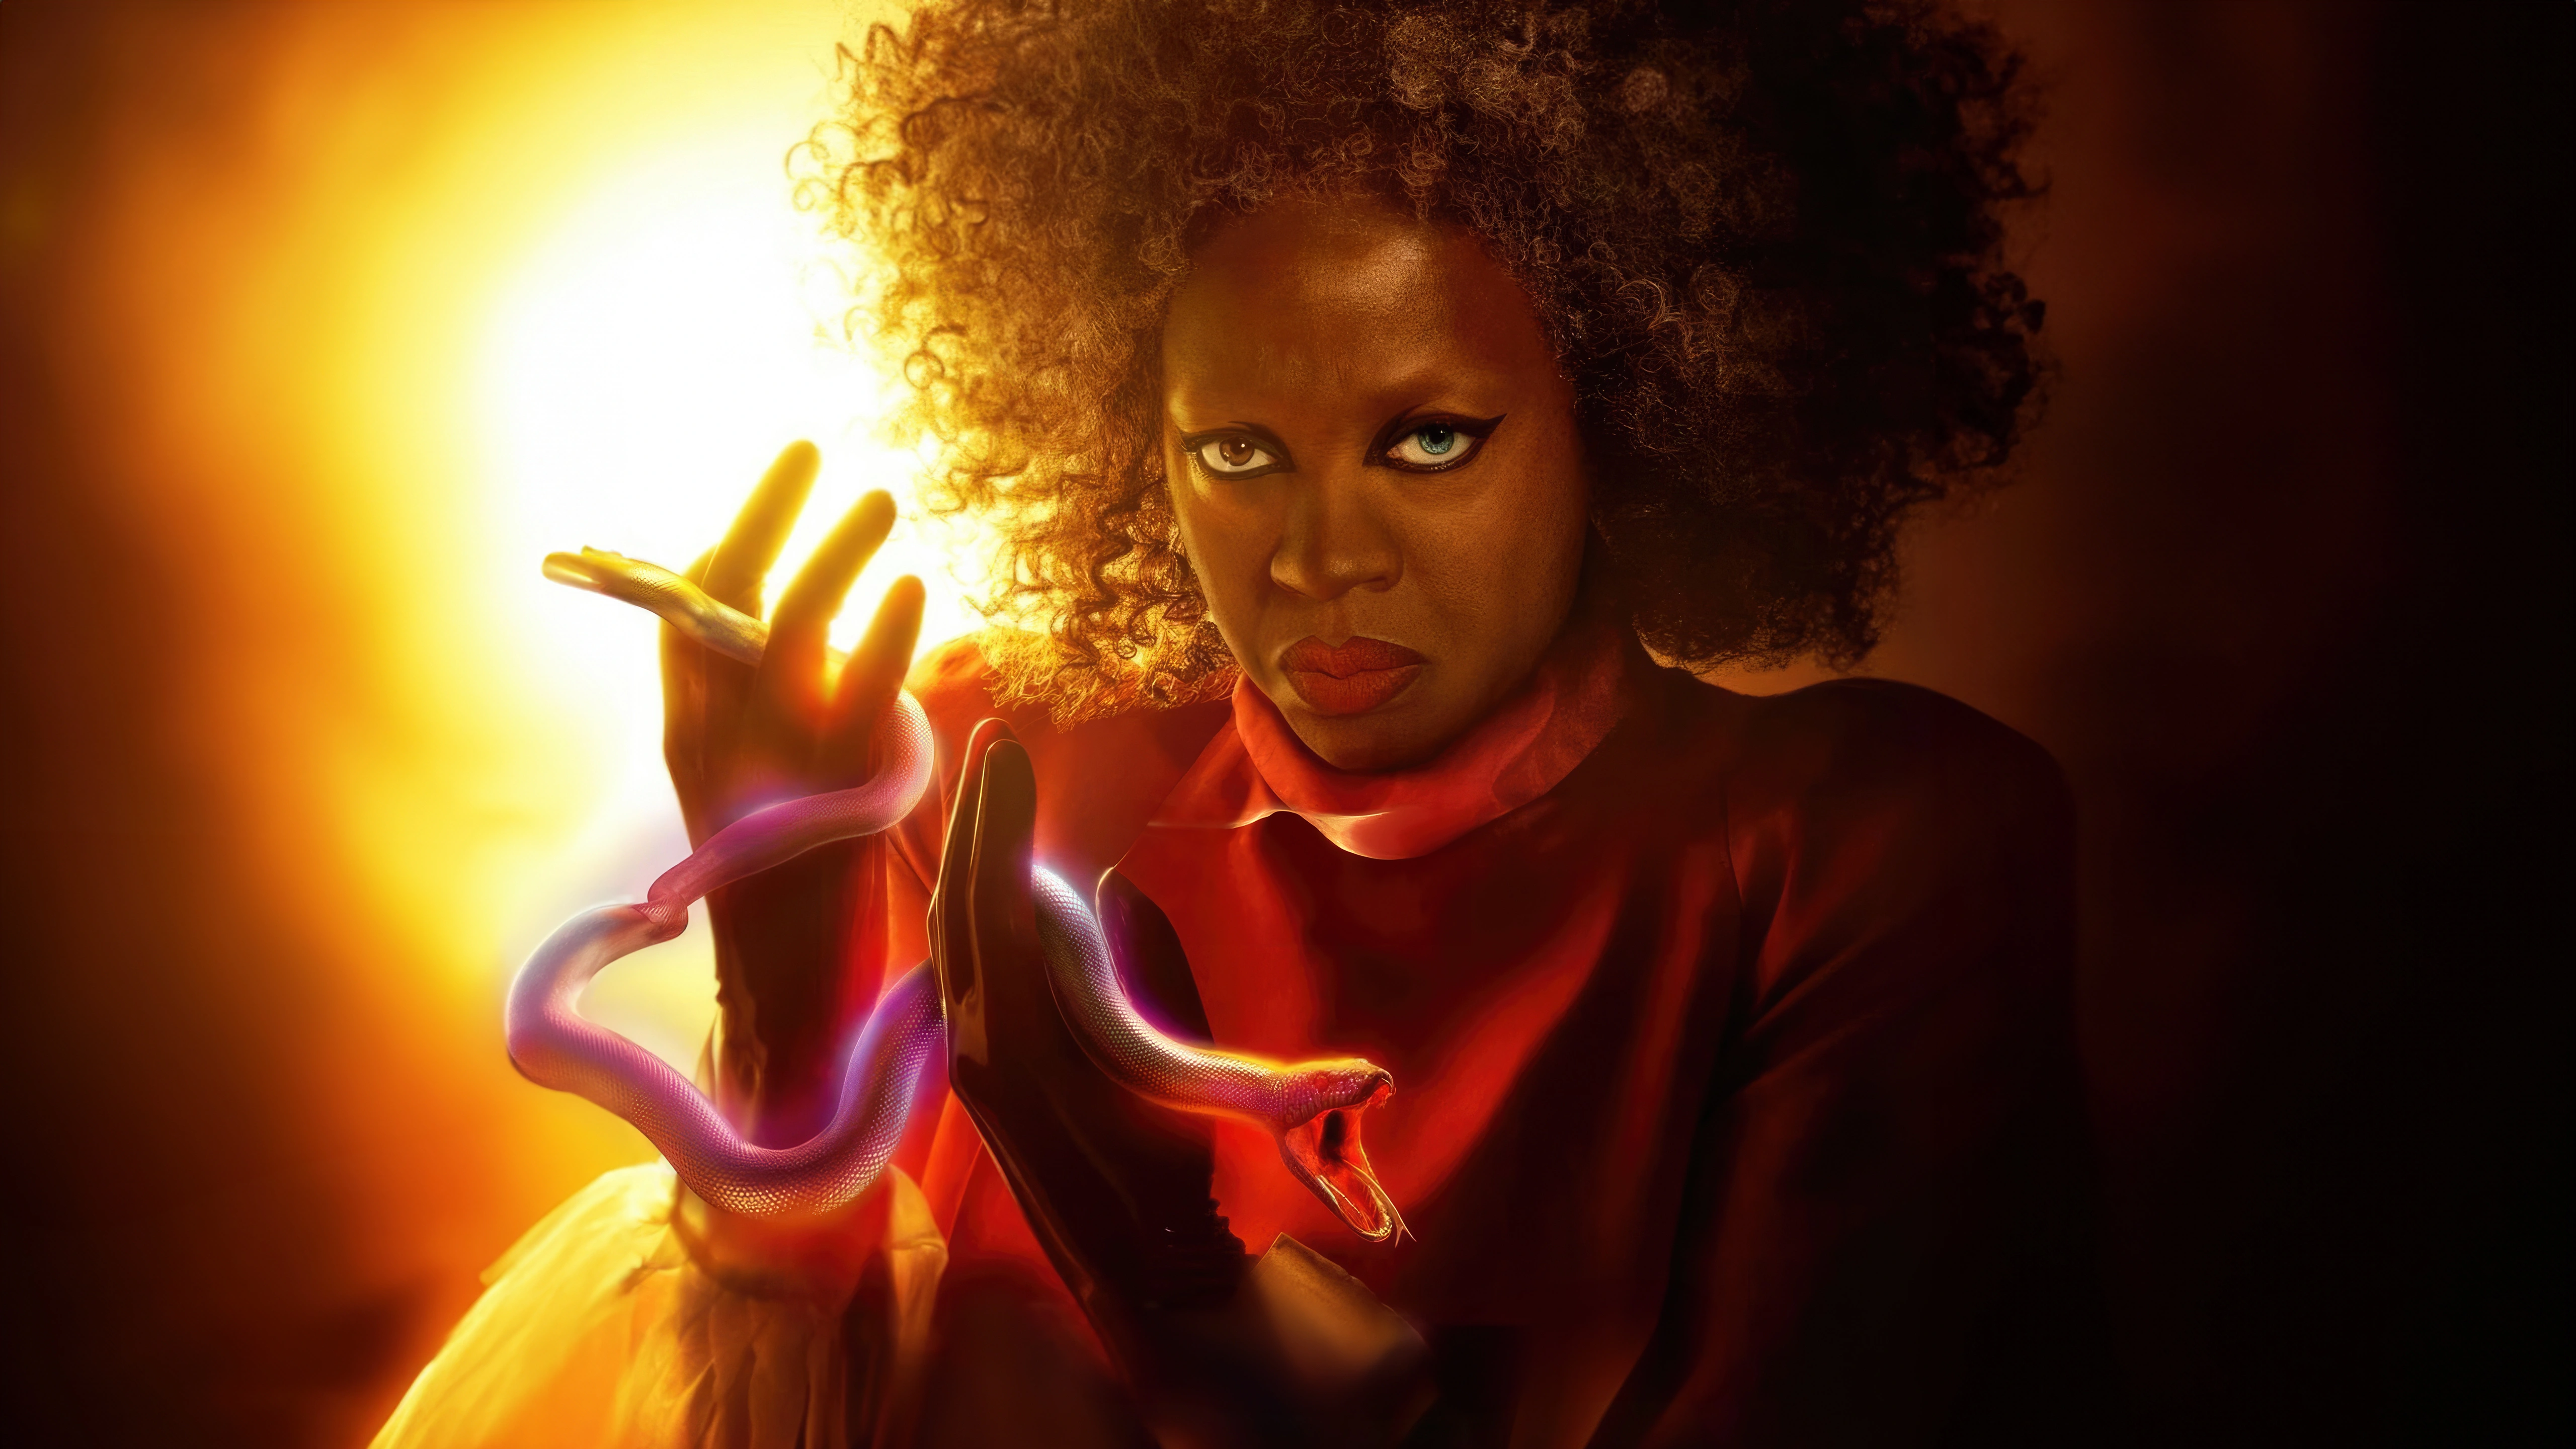 viola davis in the hunger games the ballad of songbirds and snakes 4x.jpg